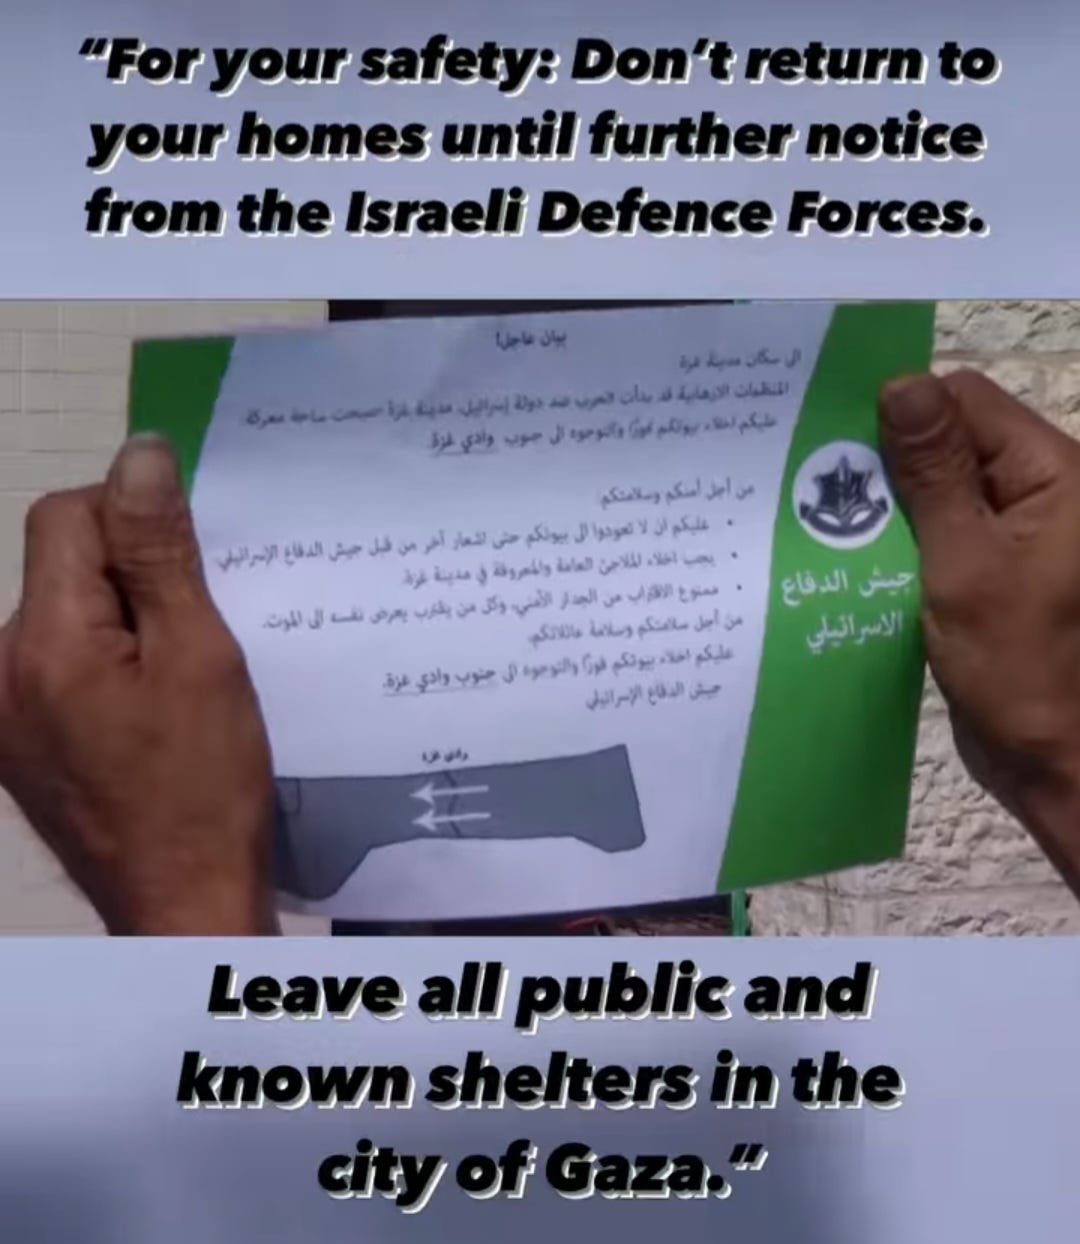 Israel Defence Forces drop warning leaflets in Gaza telling people to flee (video)